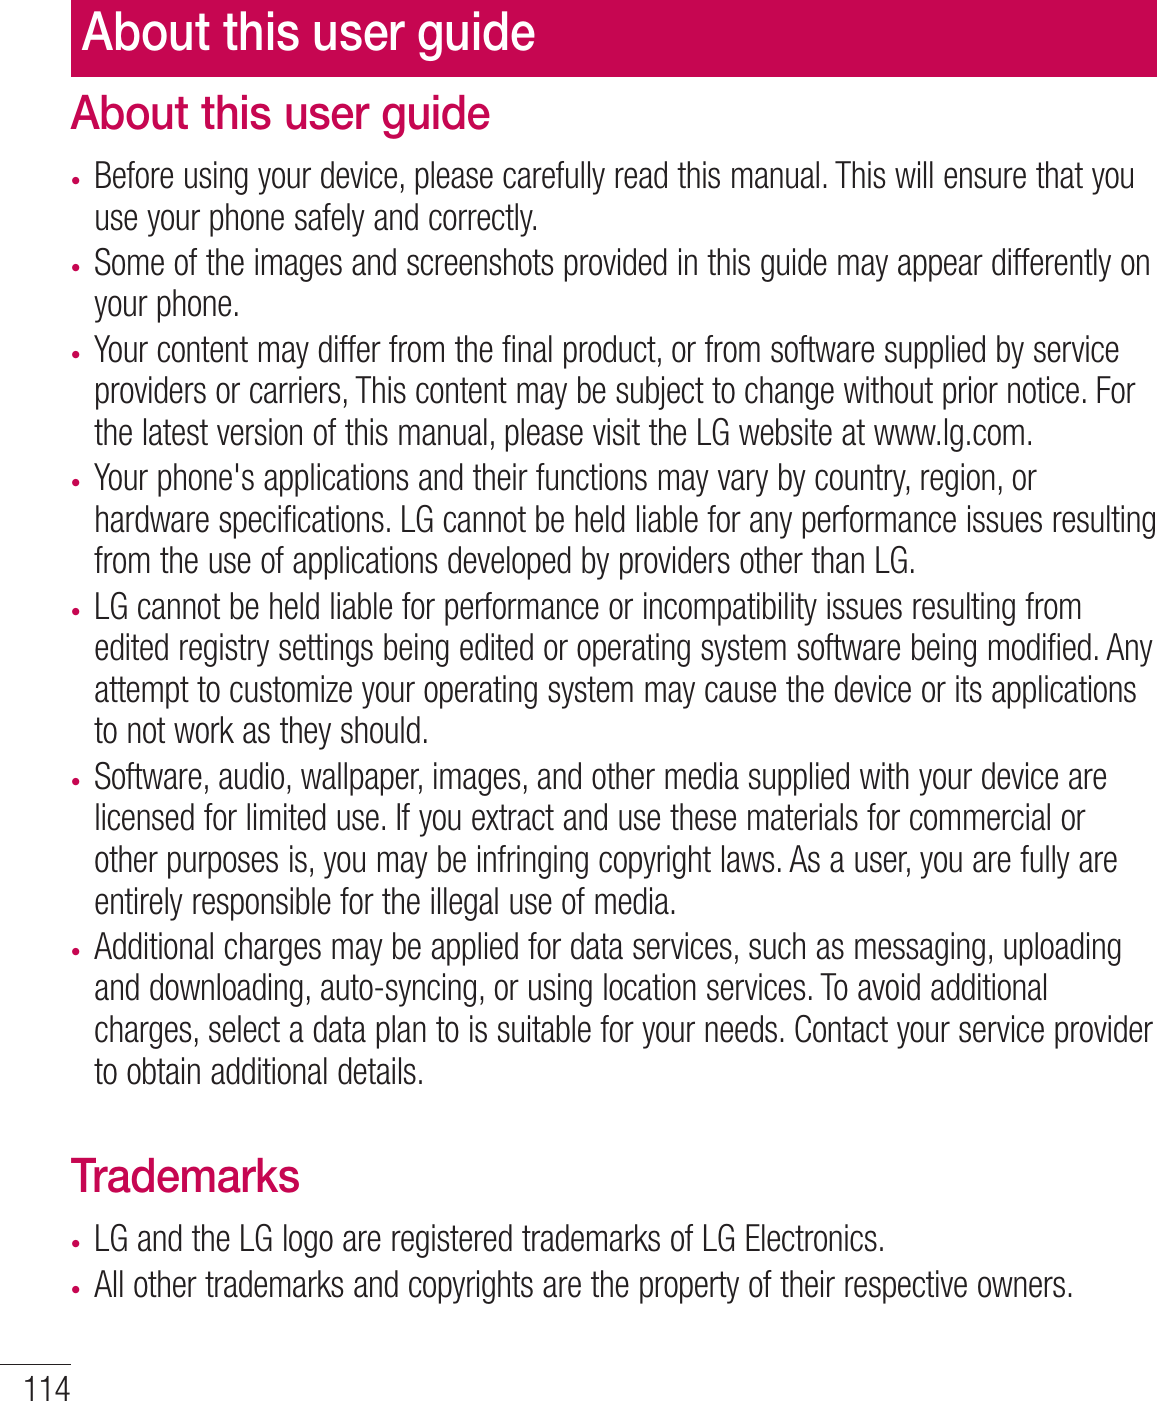 114About this user guidet Before using your device, please carefully read this manual. This will ensure that you use your phone safely and correctly.t Some of the images and screenshots provided in this guide may appear differently on your phone.t Your content may differ from the final product, or from software supplied by service providers or carriers, This content may be subject to change without prior notice. For the latest version of this manual, please visit the LG website at www.lg.com.t Your phone&apos;s applications and their functions may vary by country, region, or hardware specifications. LG cannot be held liable for any performance issues resulting from the use of applications developed by providers other than LG.t LG cannot be held liable for performance or incompatibility issues resulting from edited registry settings being edited or operating system software being modified. Any attempt to customize your operating system may cause the device or its applications to not work as they should.t Software, audio, wallpaper, images, and other media supplied with your device are licensed for limited use. If you extract and use these materials for commercial or other purposes is, you may be infringing copyright laws. As a user, you are fully are entirely responsible for the illegal use of media.t Additional charges may be applied for data services, such as messaging, uploading and downloading, auto-syncing, or using location services. To avoid additional charges, select a data plan to is suitable for your needs. Contact your service provider to obtain additional details.Trademarkst LG and the LG logo are registered trademarks of LG Electronics.t All other trademarks and copyrights are the property of their respective owners.About this user guide